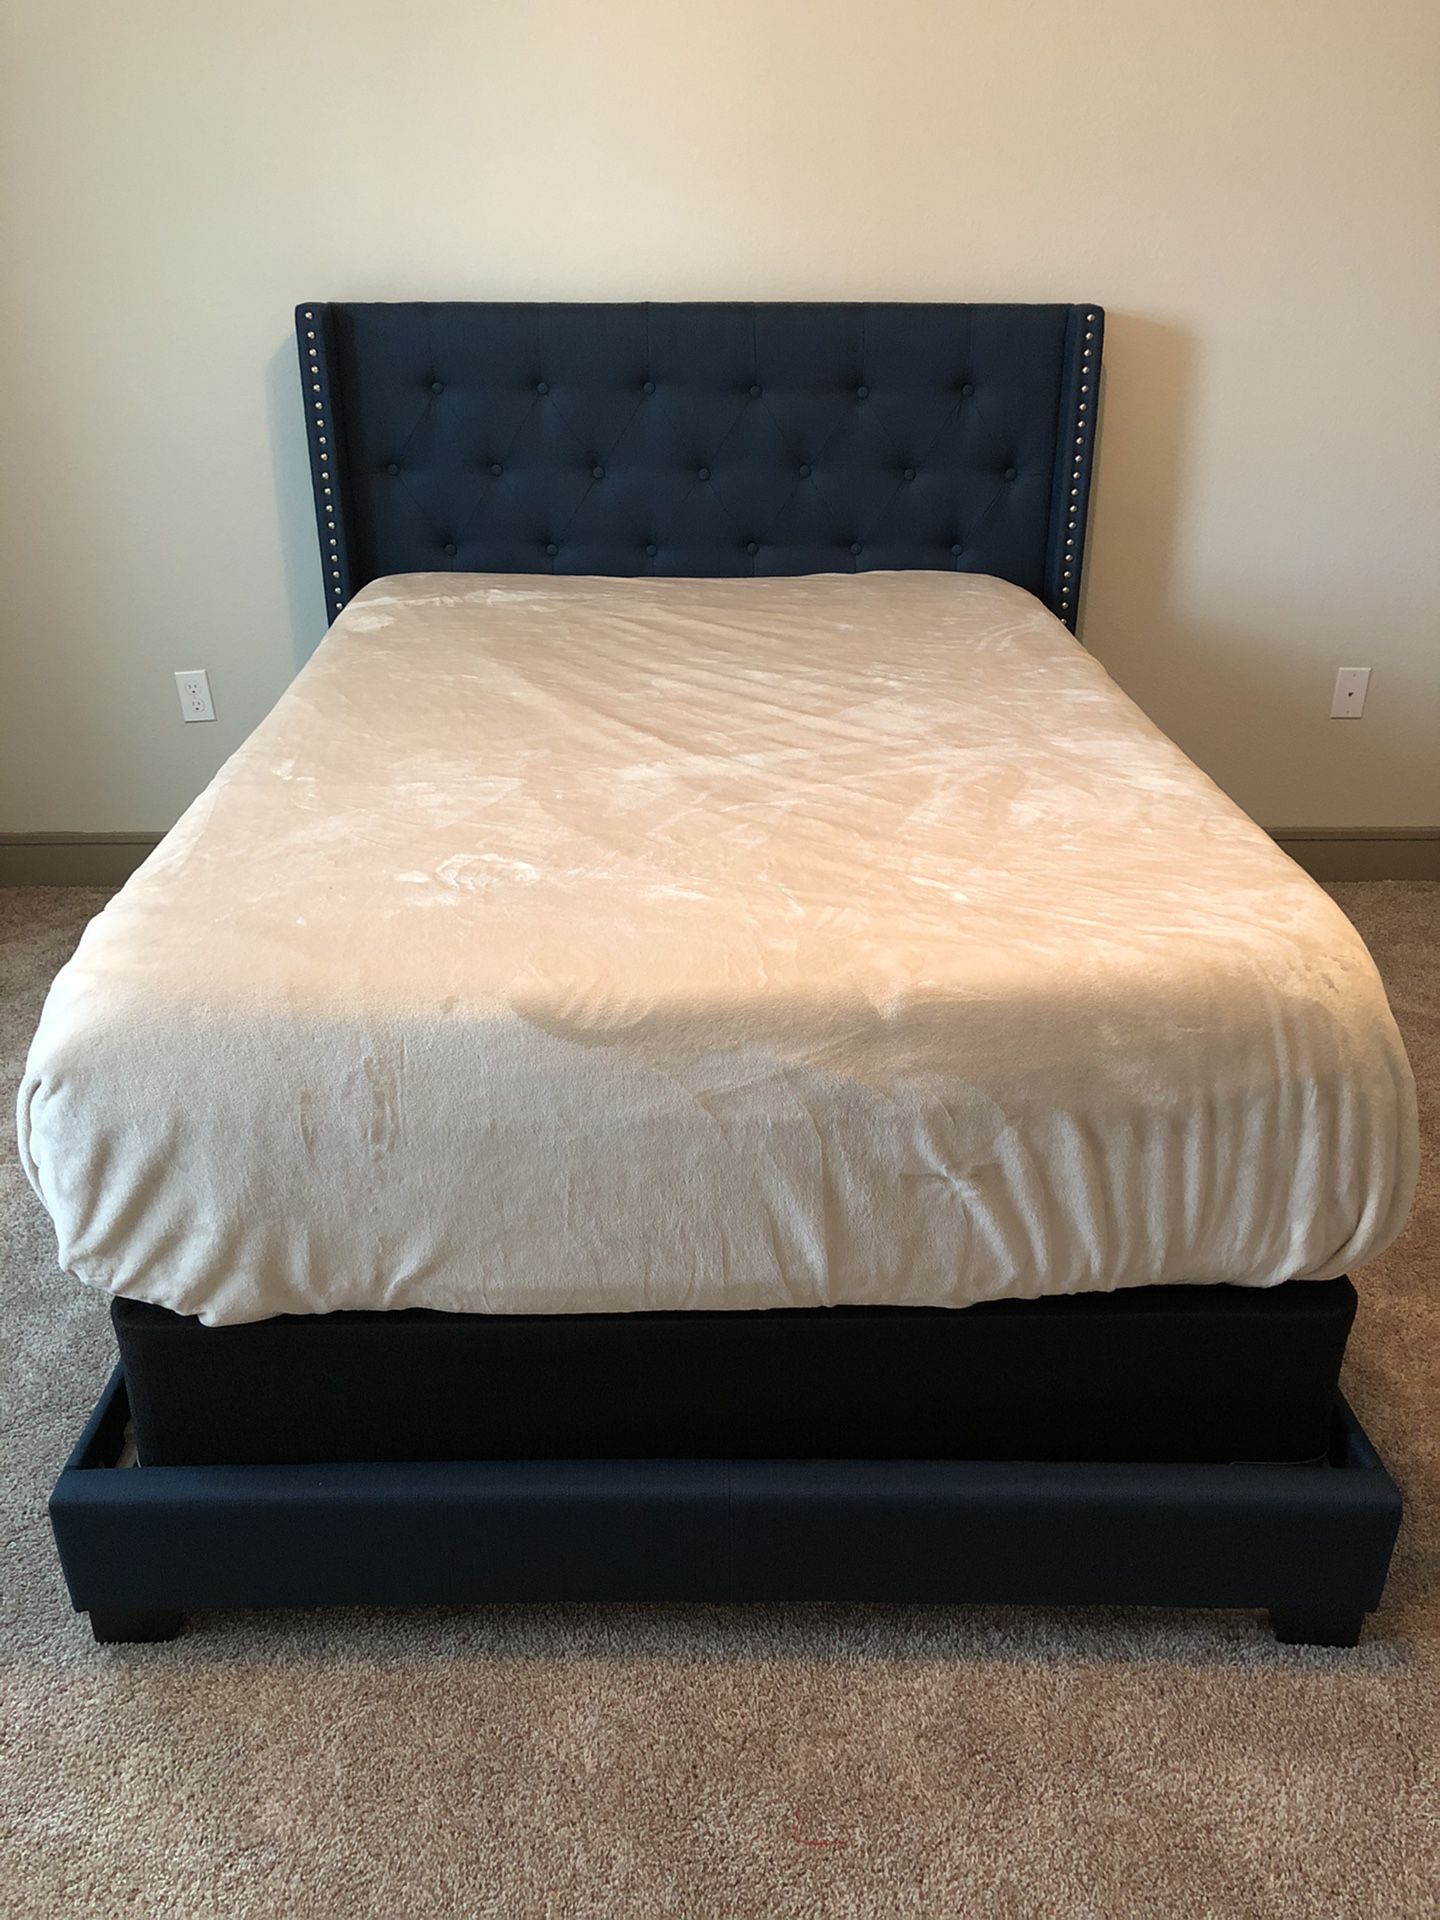 Navy blue bed FRAME,(mattress not included) used only 4 months